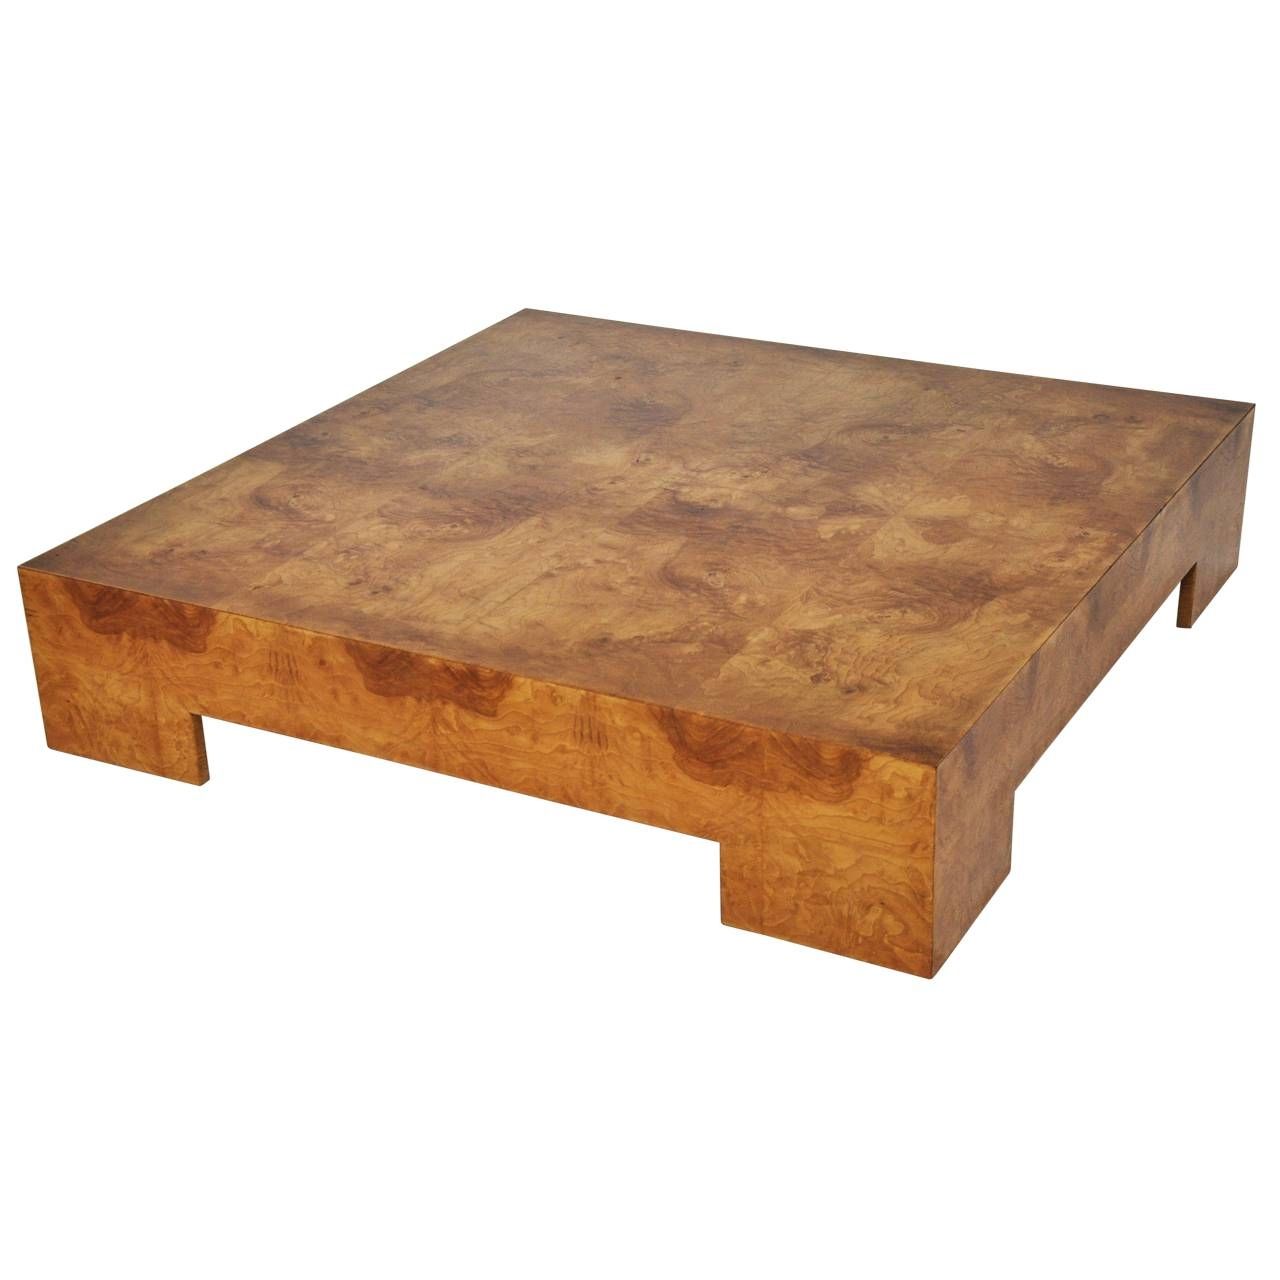 Milo Baughman Low Burl Wood Coffee Table – Online Interior Design With Regard To Low Wooden Coffee Tables (View 15 of 15)